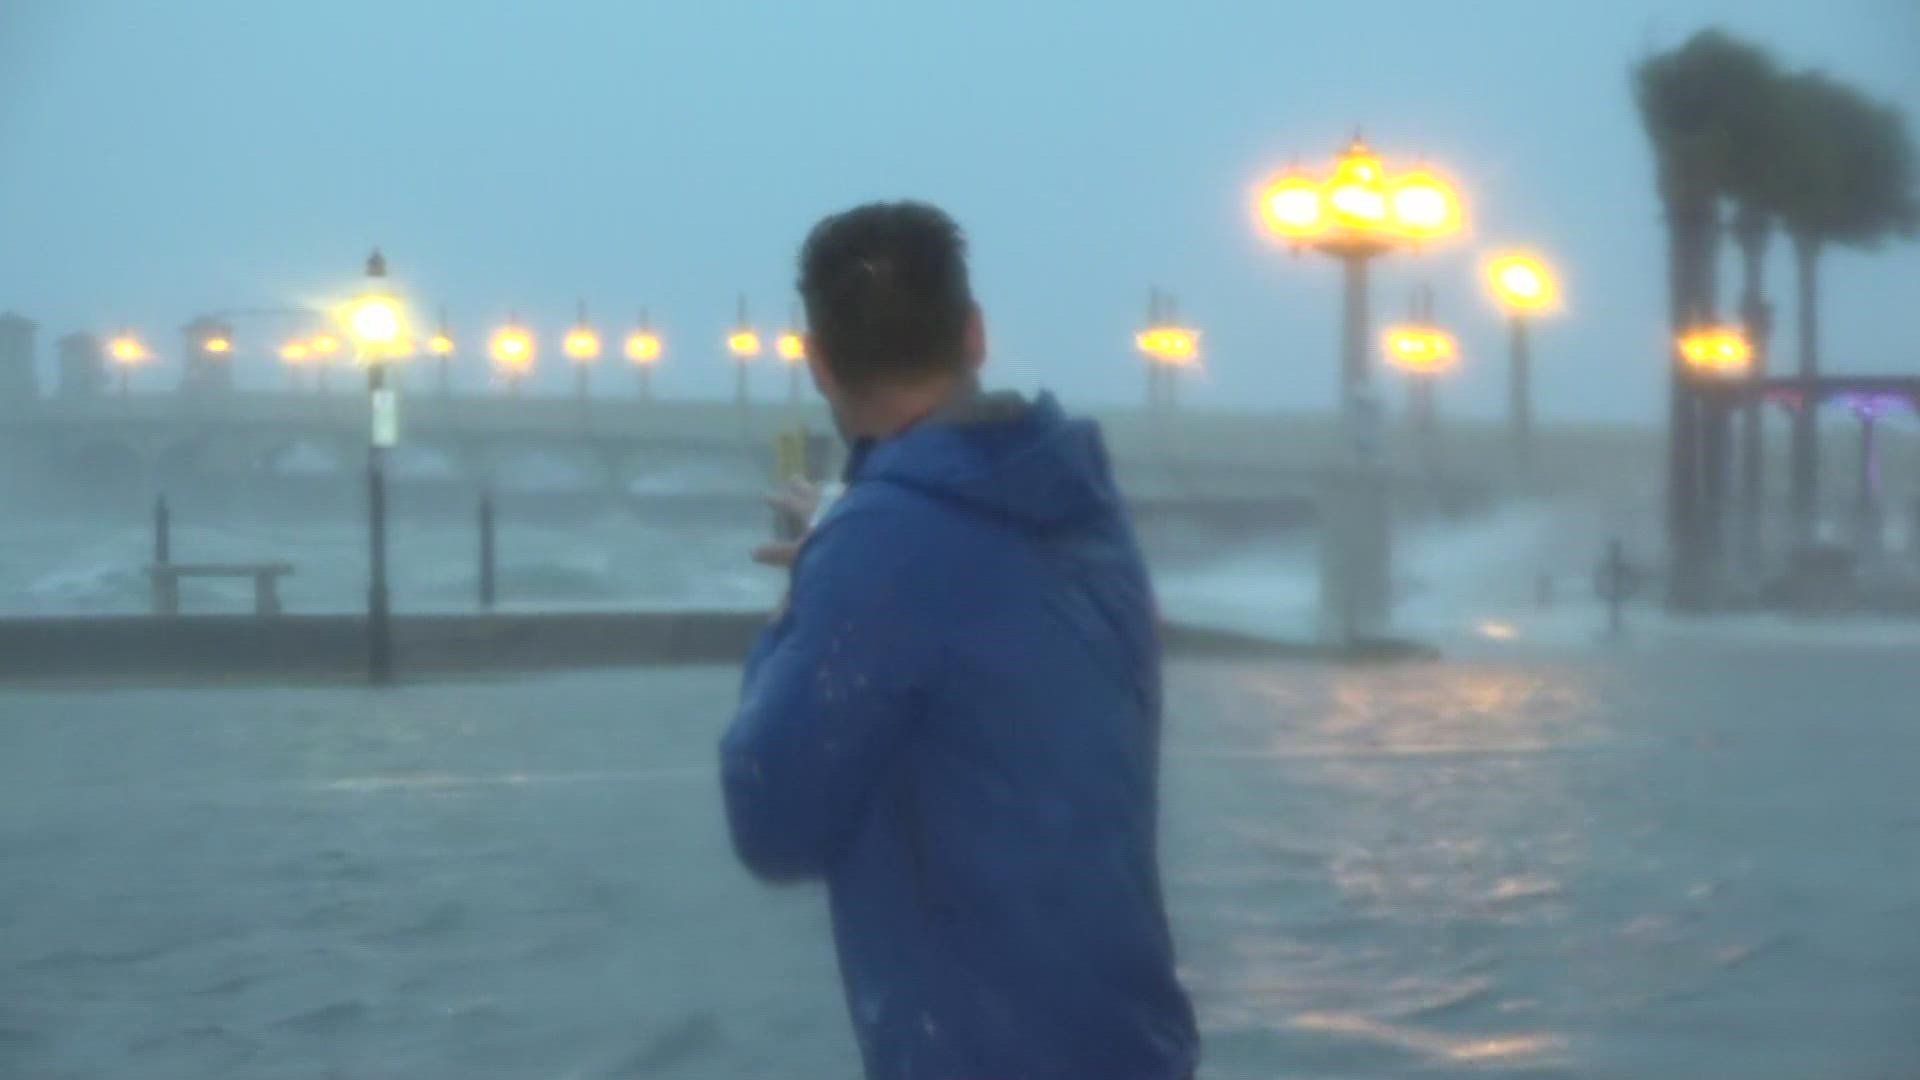 Flooding is expected to increase closer to high tide, at 9 a.m.